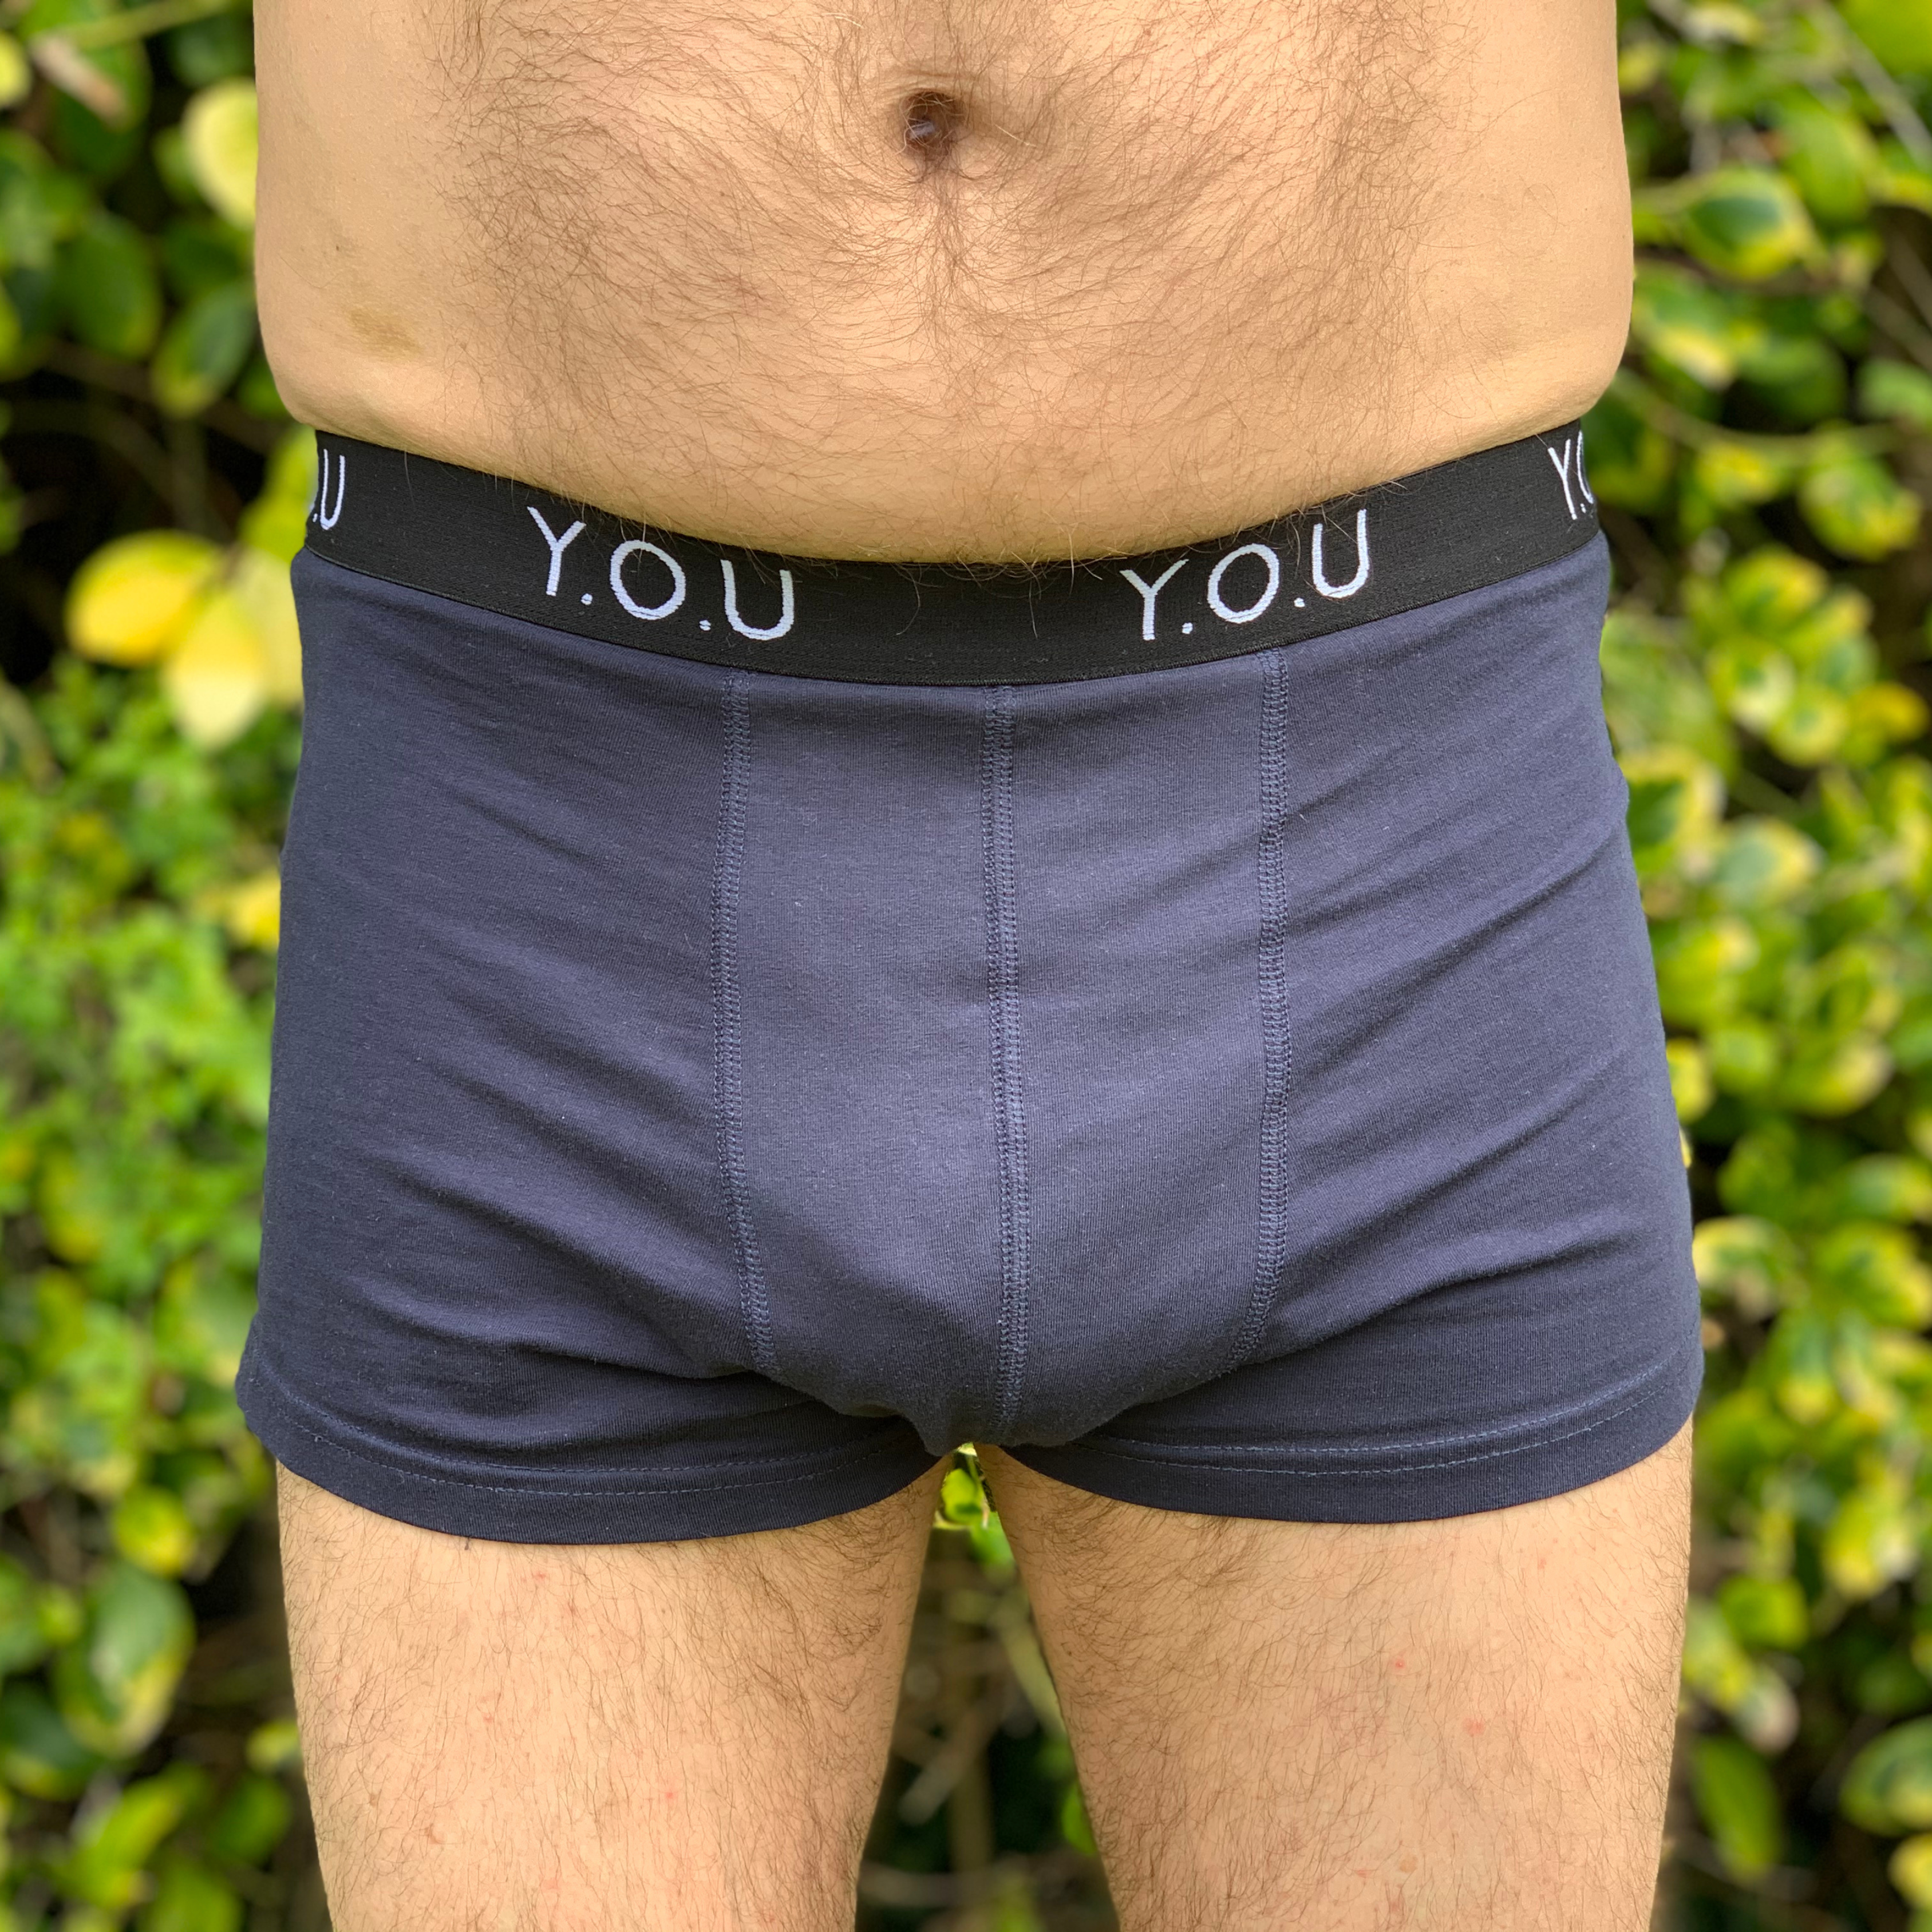 Close-up of a person wearing navy blue men’s hipster trunks with a black waistband that has "Y.O.U" written on it. The person is standing outdoors with green foliage in the background.